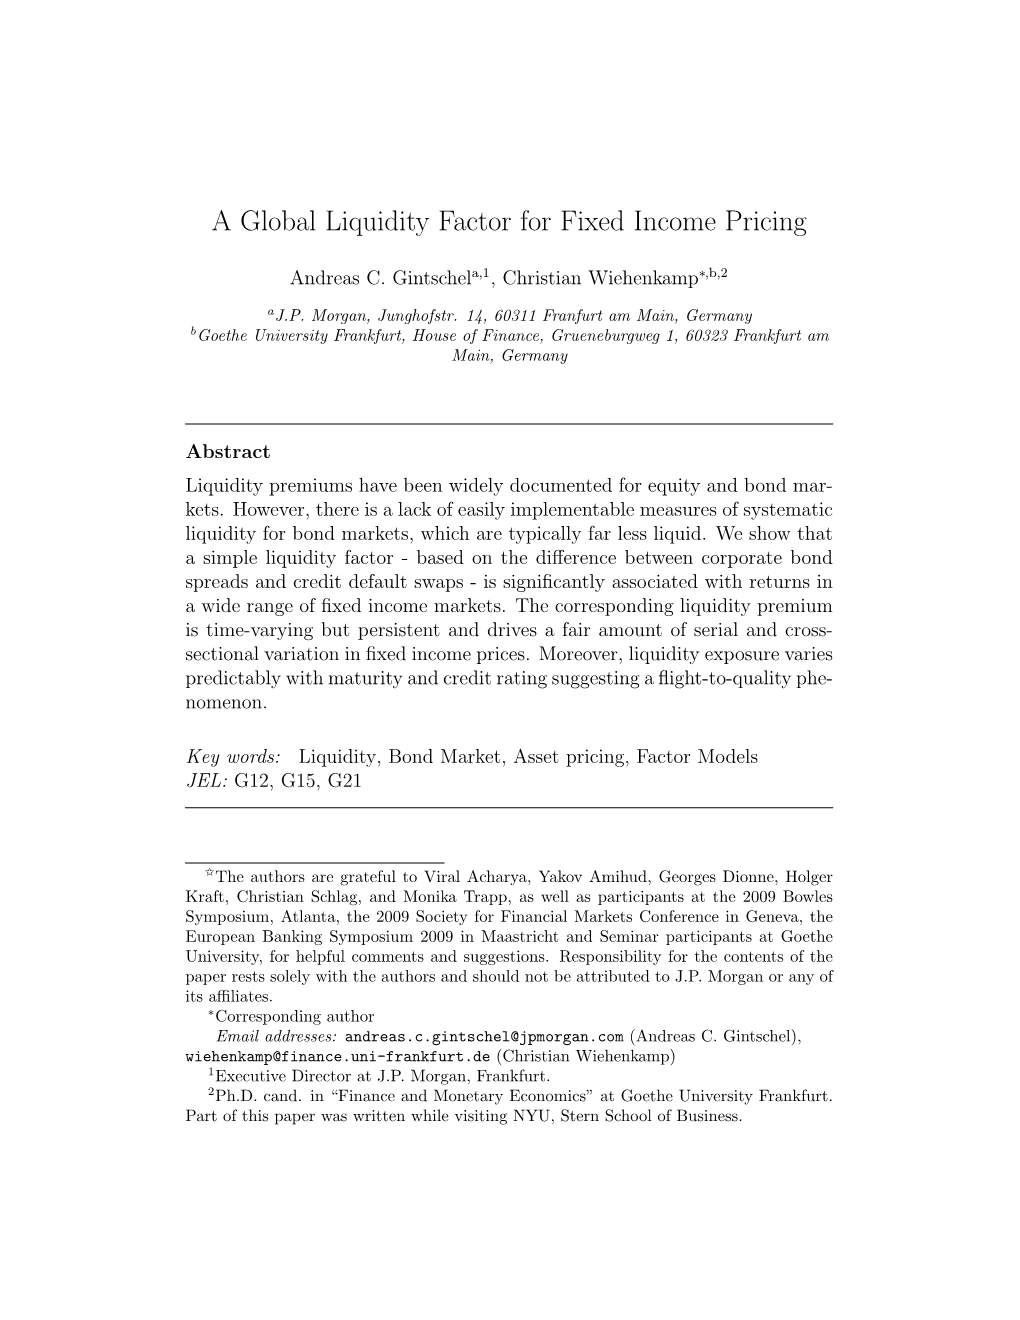 A Global Liquidity Factor for Fixed Income Pricing